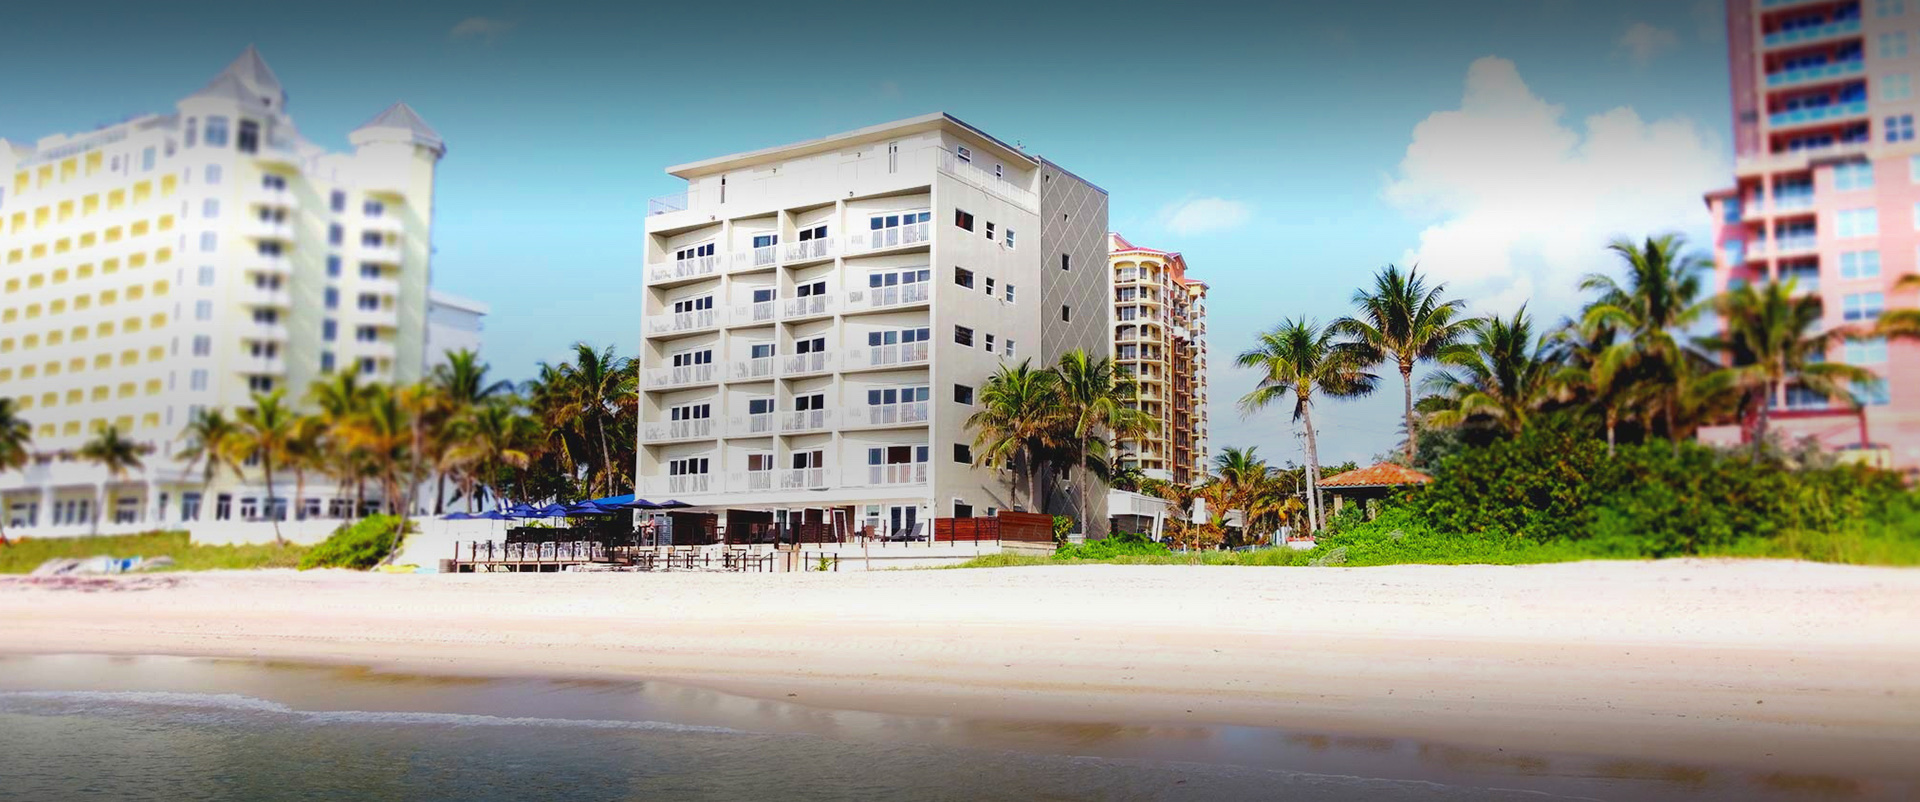 hotel building in front of the ocean with palm trees around